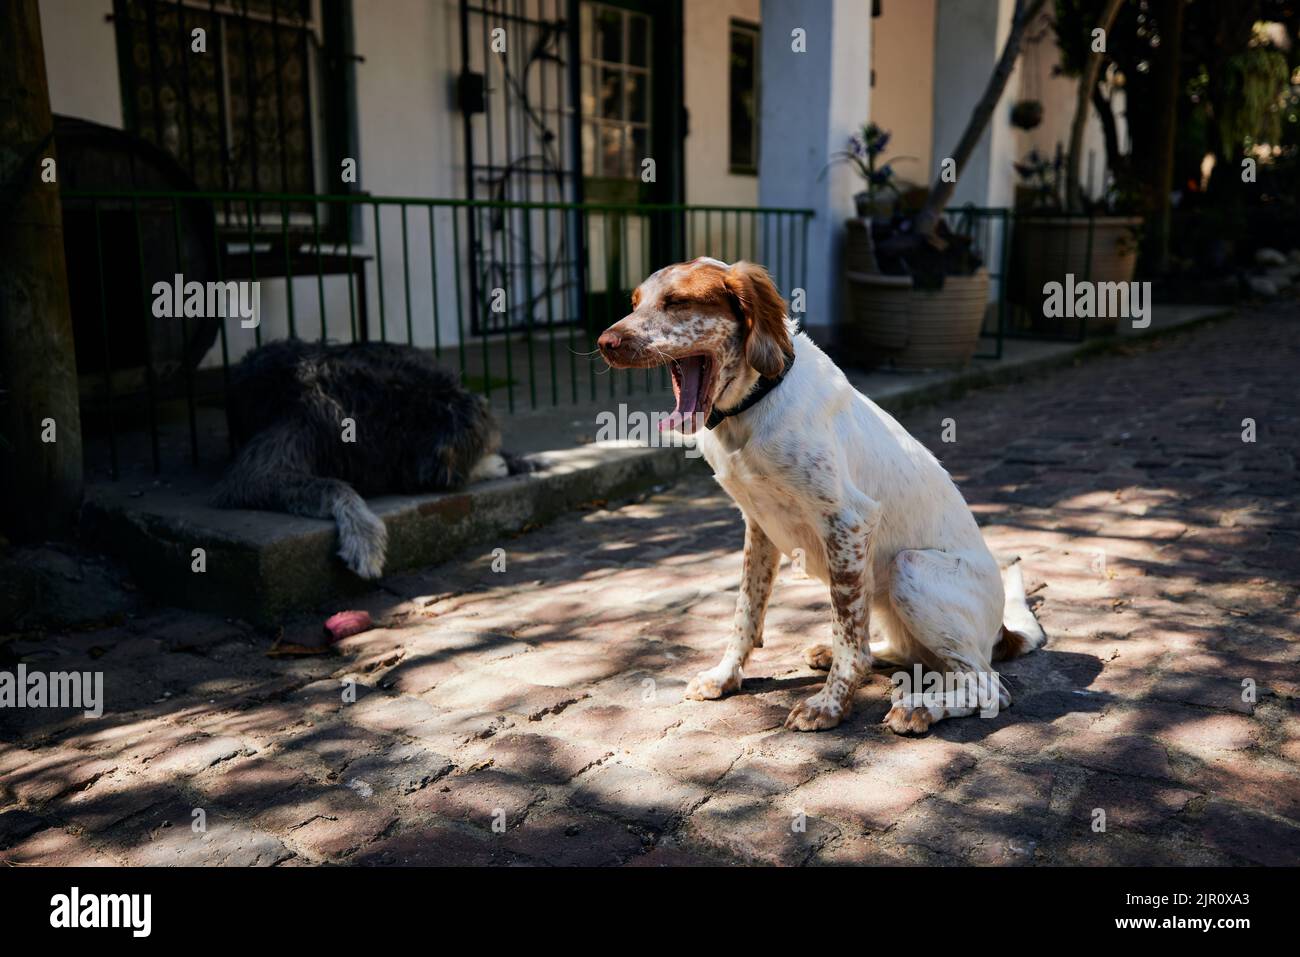 A cute Brittany dog with an open mouth sitting on a street in front of a house Stock Photo